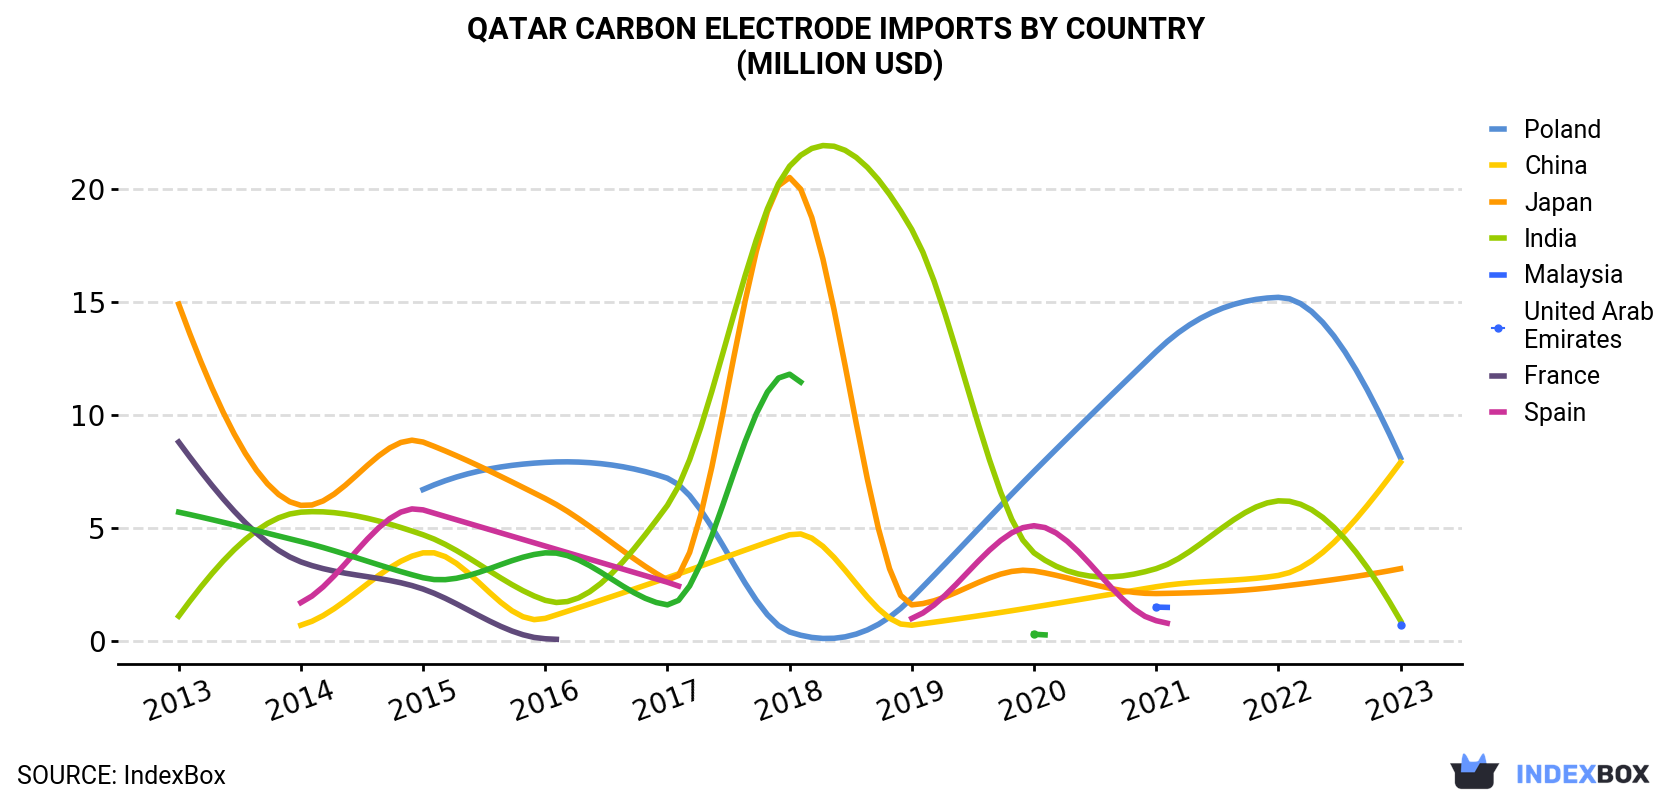 Qatar Carbon Electrode Imports By Country (Million USD)